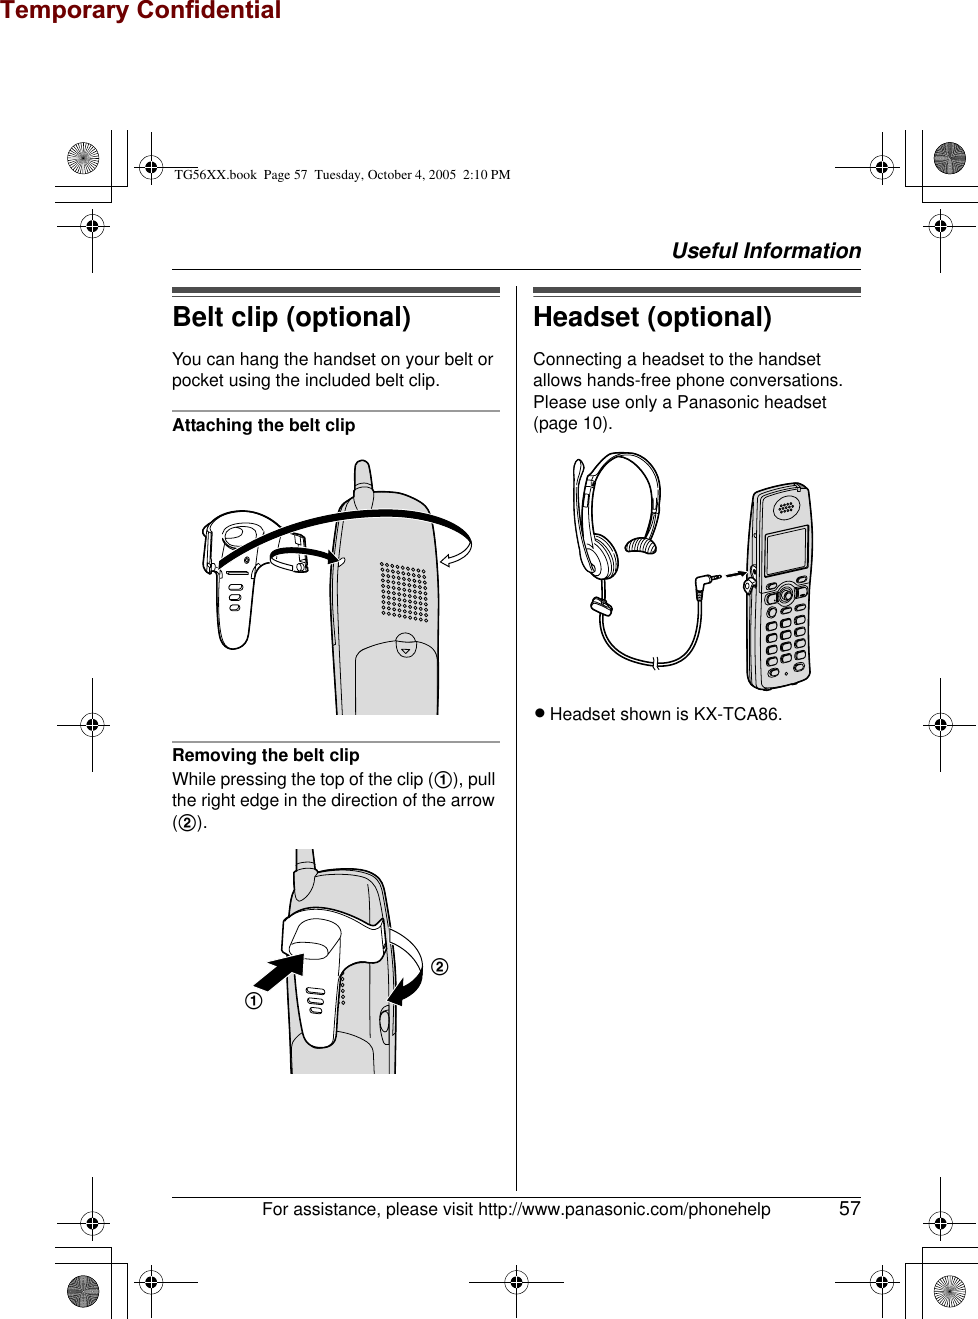 Temporary ConfidentialUseful InformationFor assistance, please visit http://www.panasonic.com/phonehelp 57Belt clip (optional)You can hang the handset on your belt or pocket using the included belt clip.Attaching the belt clipRemoving the belt clipWhile pressing the top of the clip (1), pull the right edge in the direction of the arrow (2).Headset (optional)Connecting a headset to the handset allows hands-free phone conversations. Please use only a Panasonic headset (page 10).LHeadset shown is KX-TCA86.12TG56XX.book  Page 57  Tuesday, October 4, 2005  2:10 PM